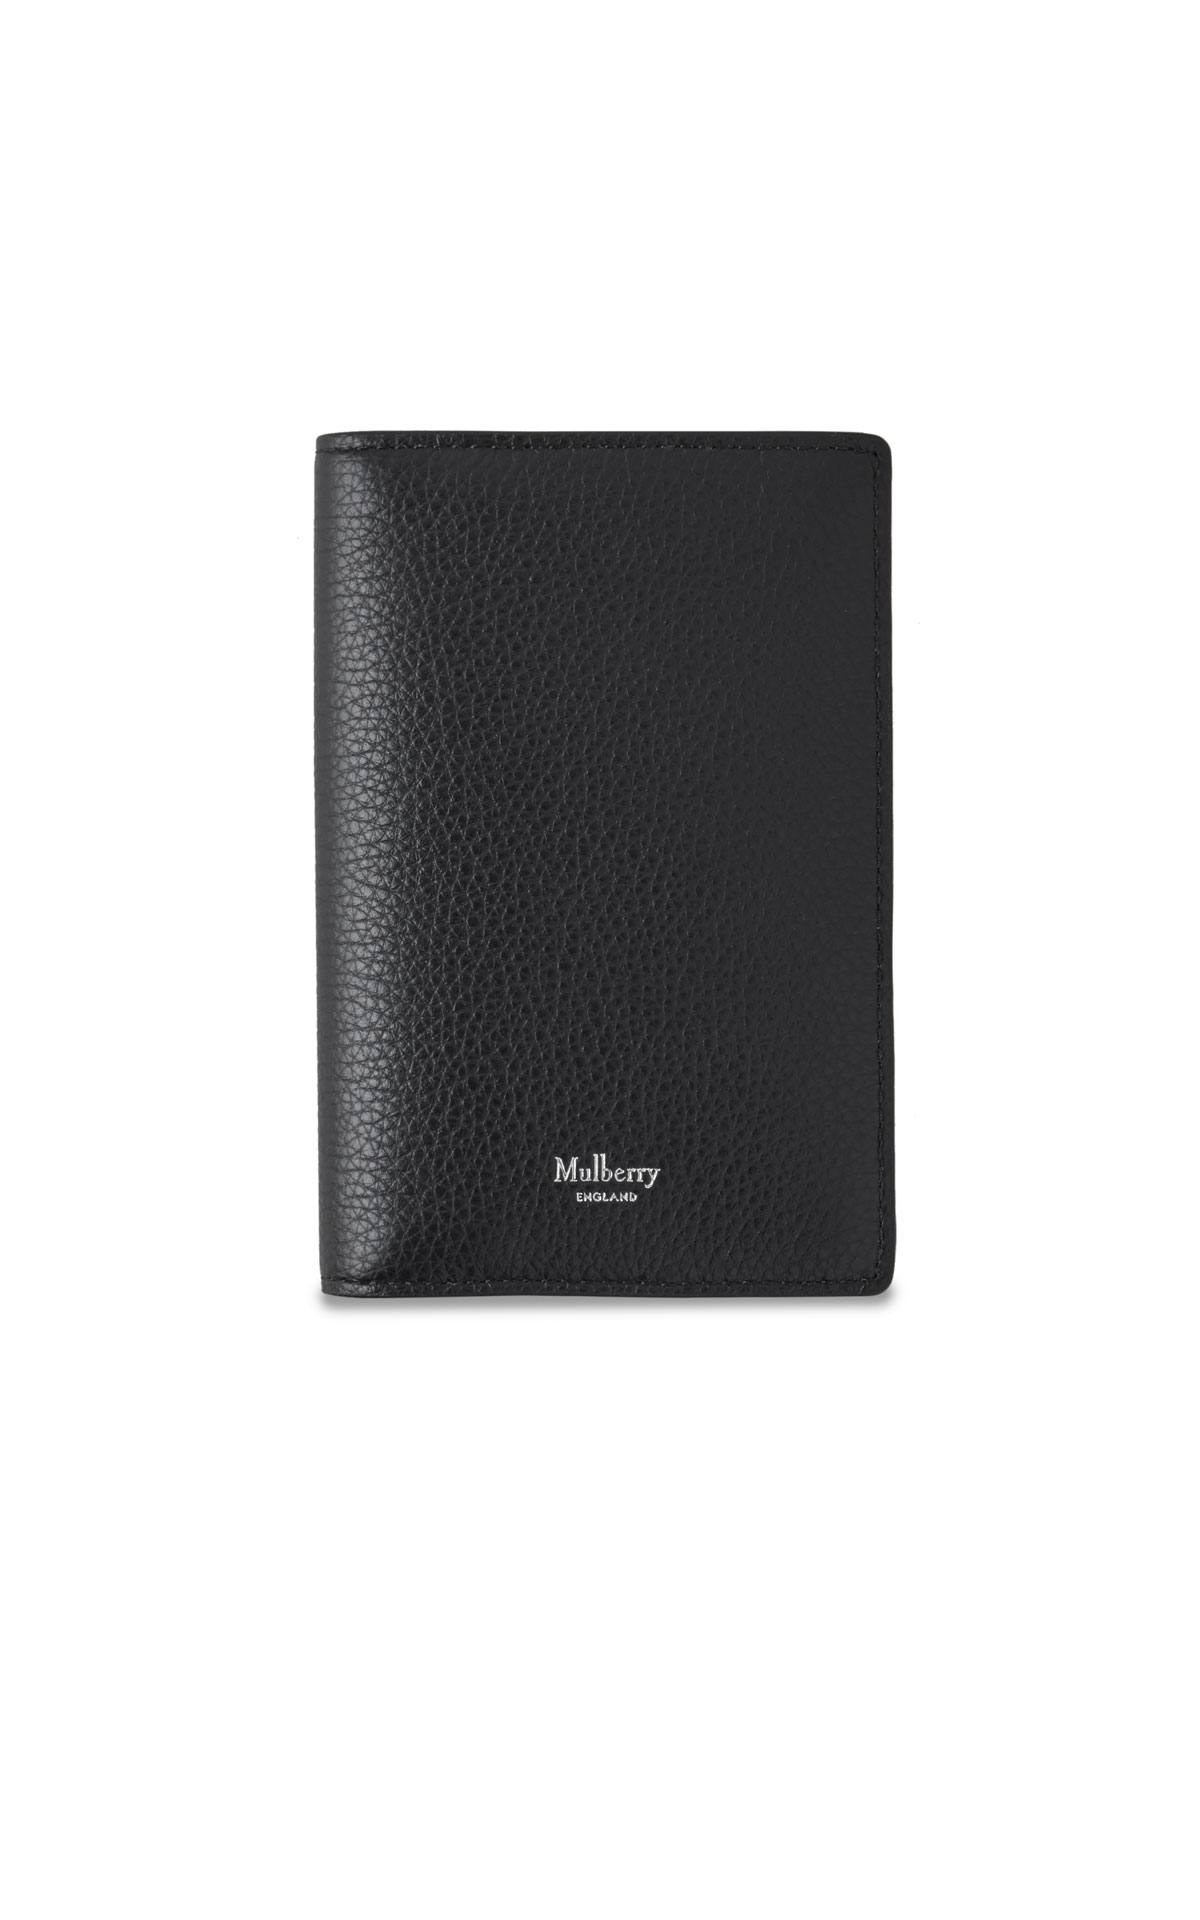 Mulberry  New passport cover small classic grain from Bicester Village